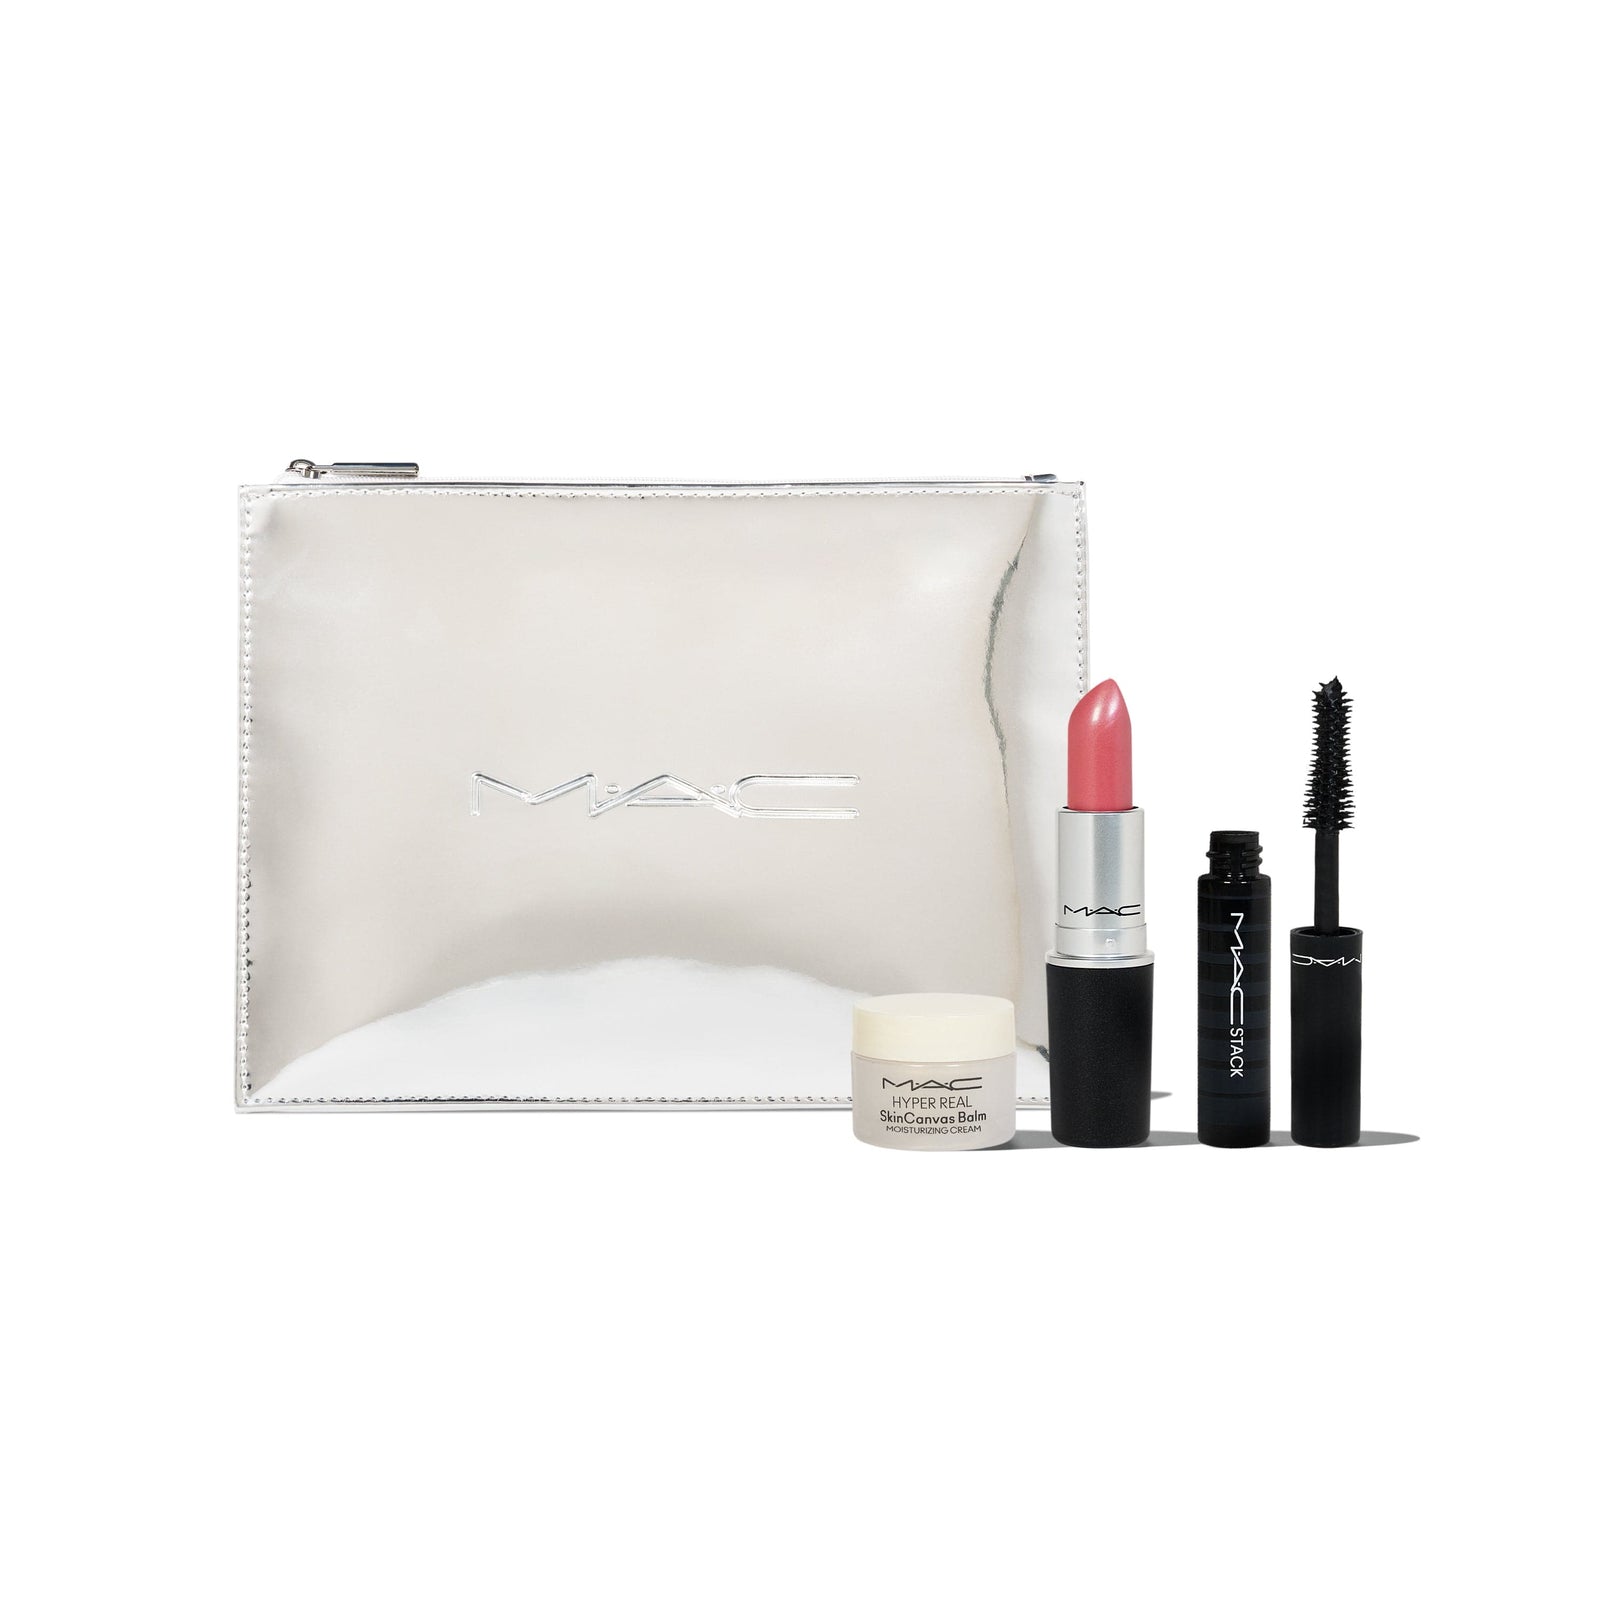 GIFT: MAC Black Friday Free Gift with Purchase